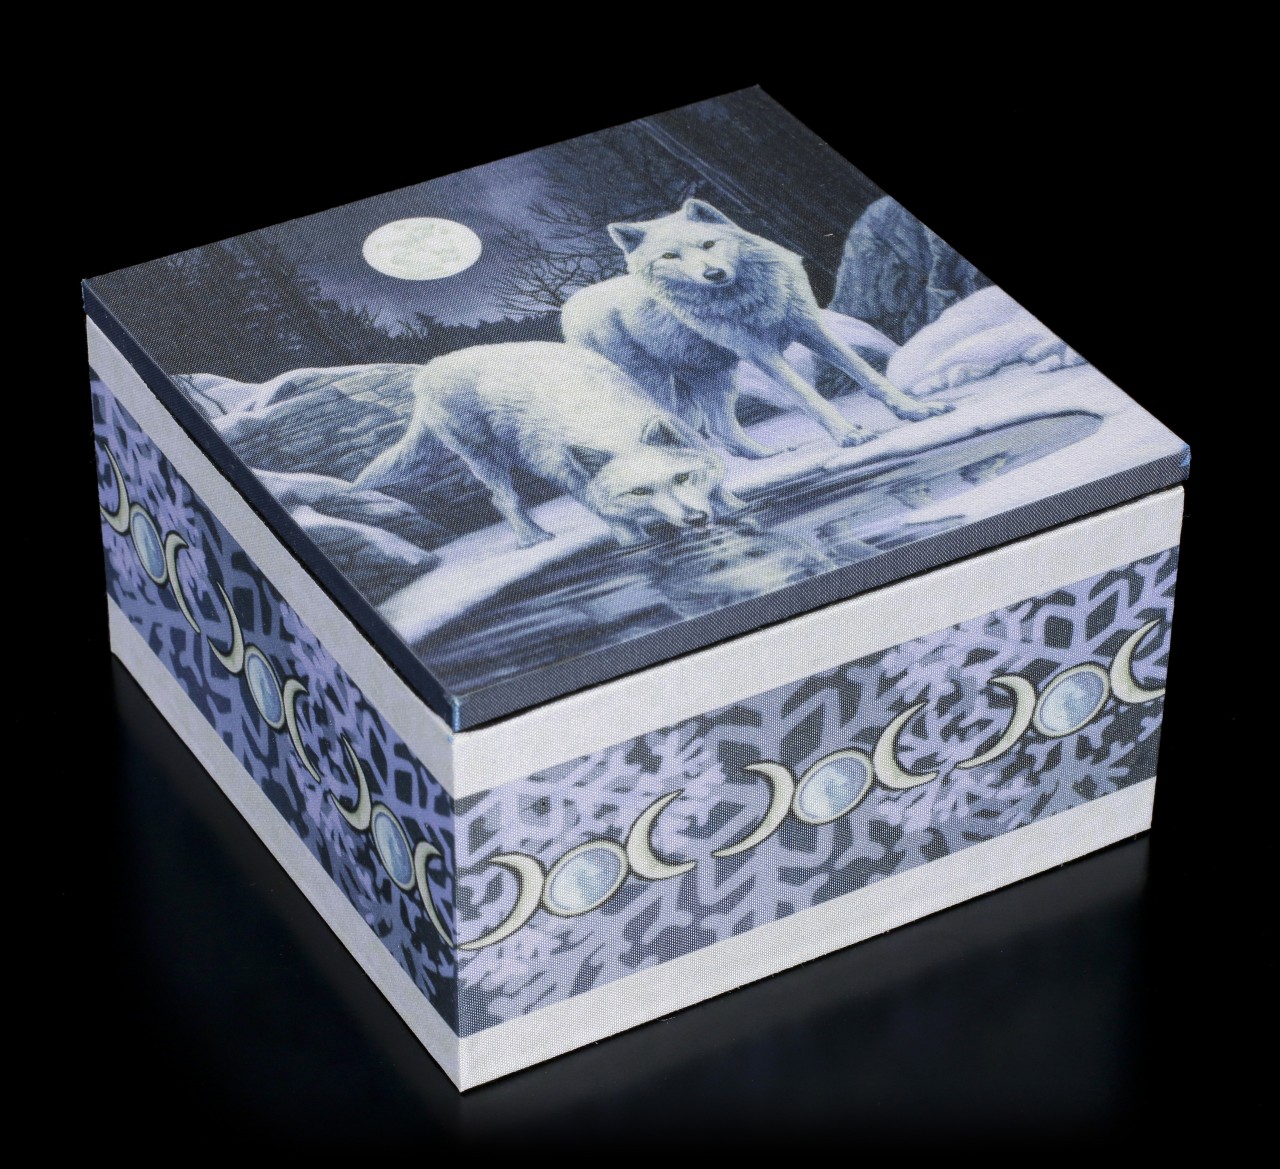 Mirror Box with Wolves - Warriors of Winter